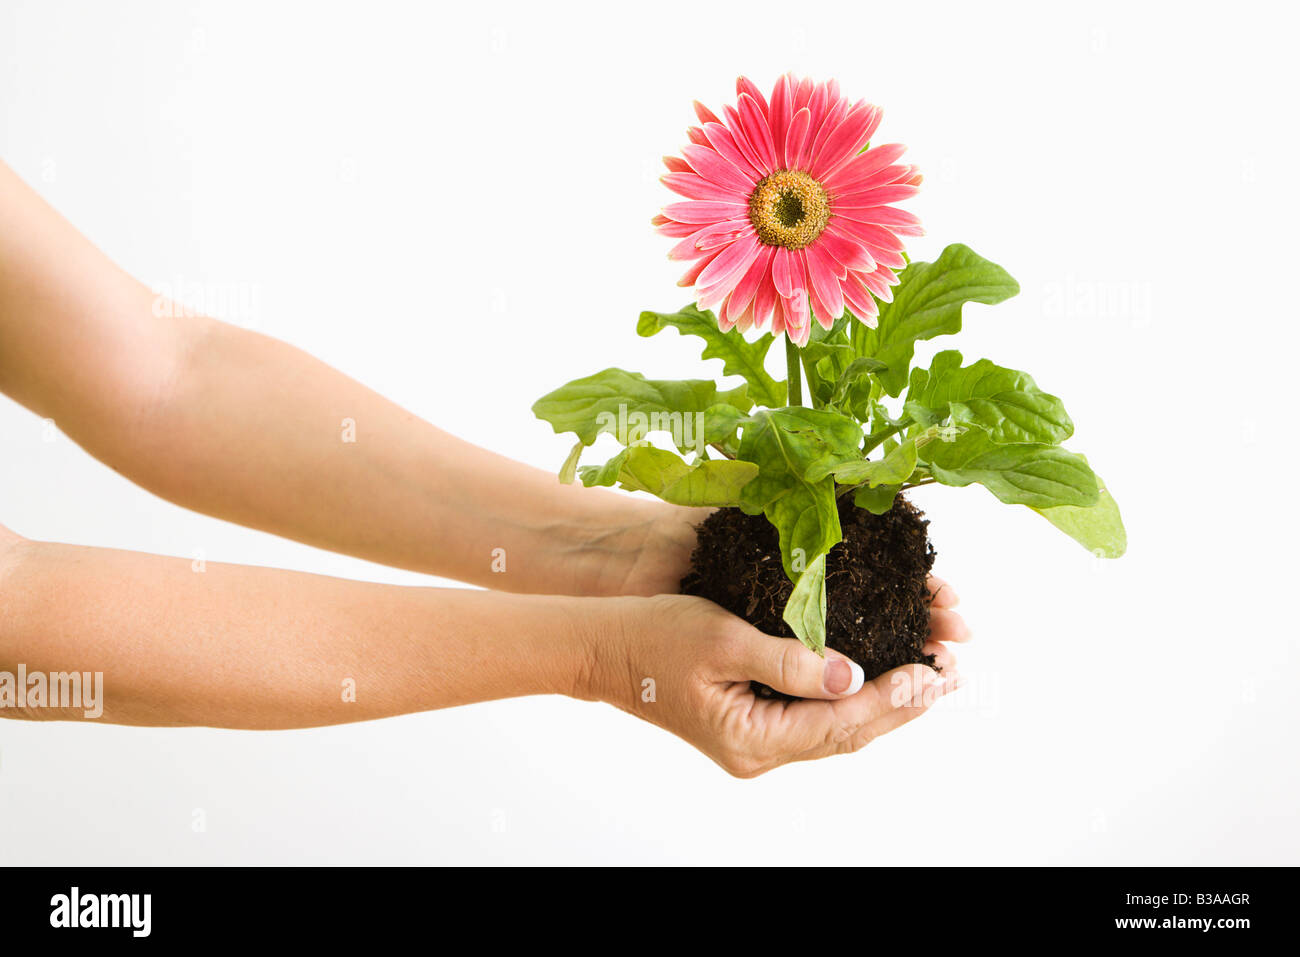 Woman s hand holding pink gerber daisy plant Stock Photo